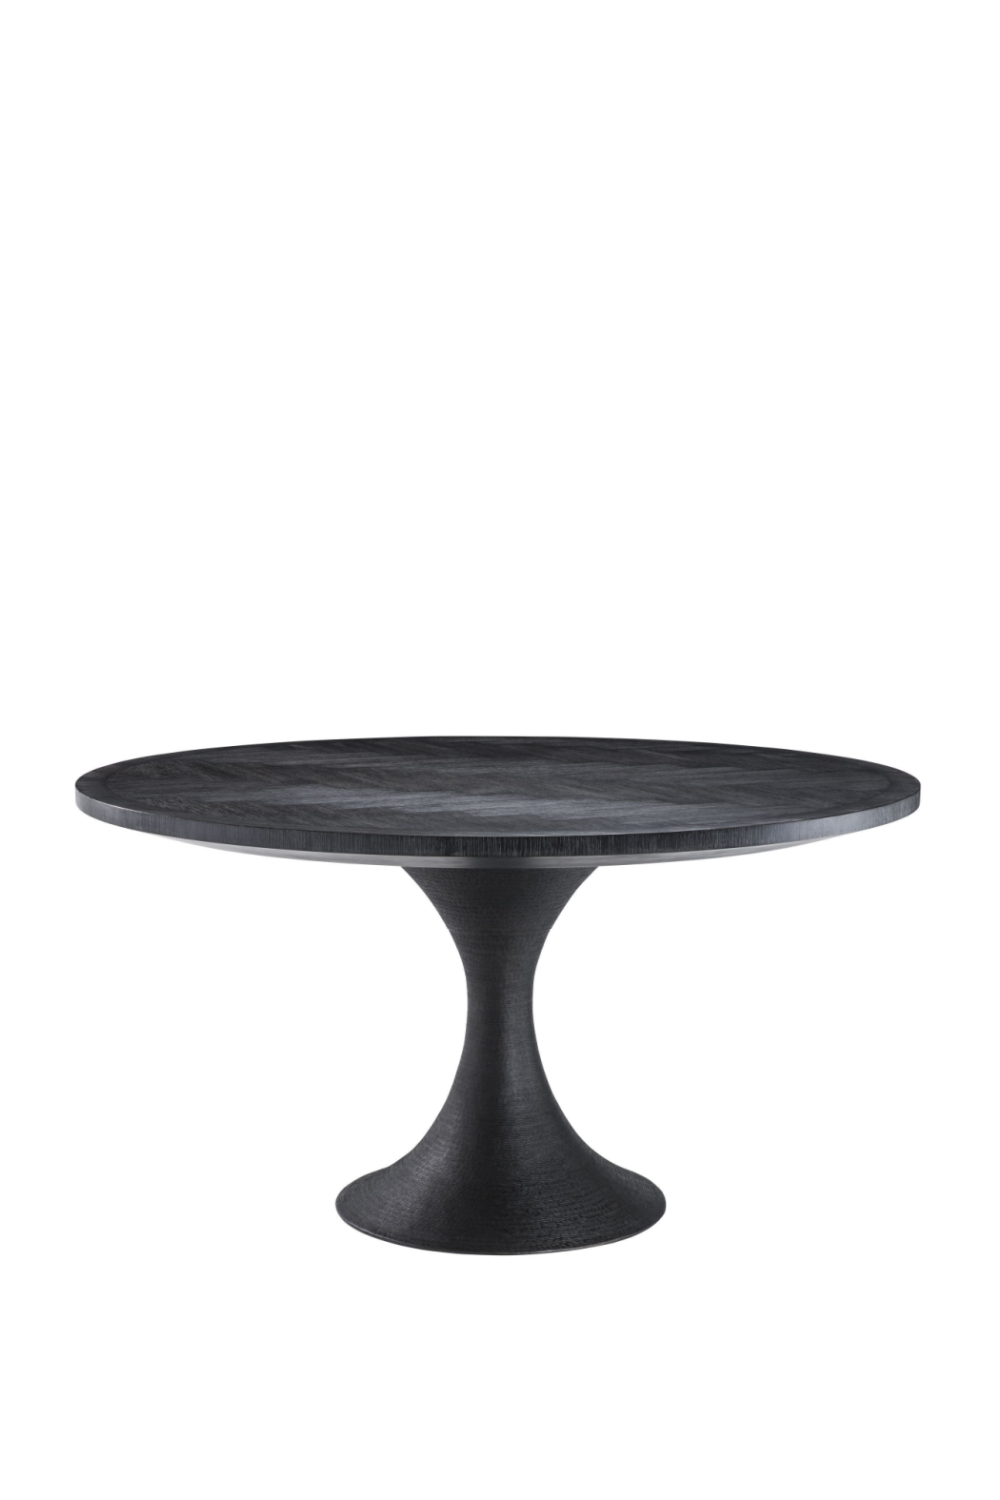 Round Charcoal Dining Table | Eichholtz Melchior | OROA